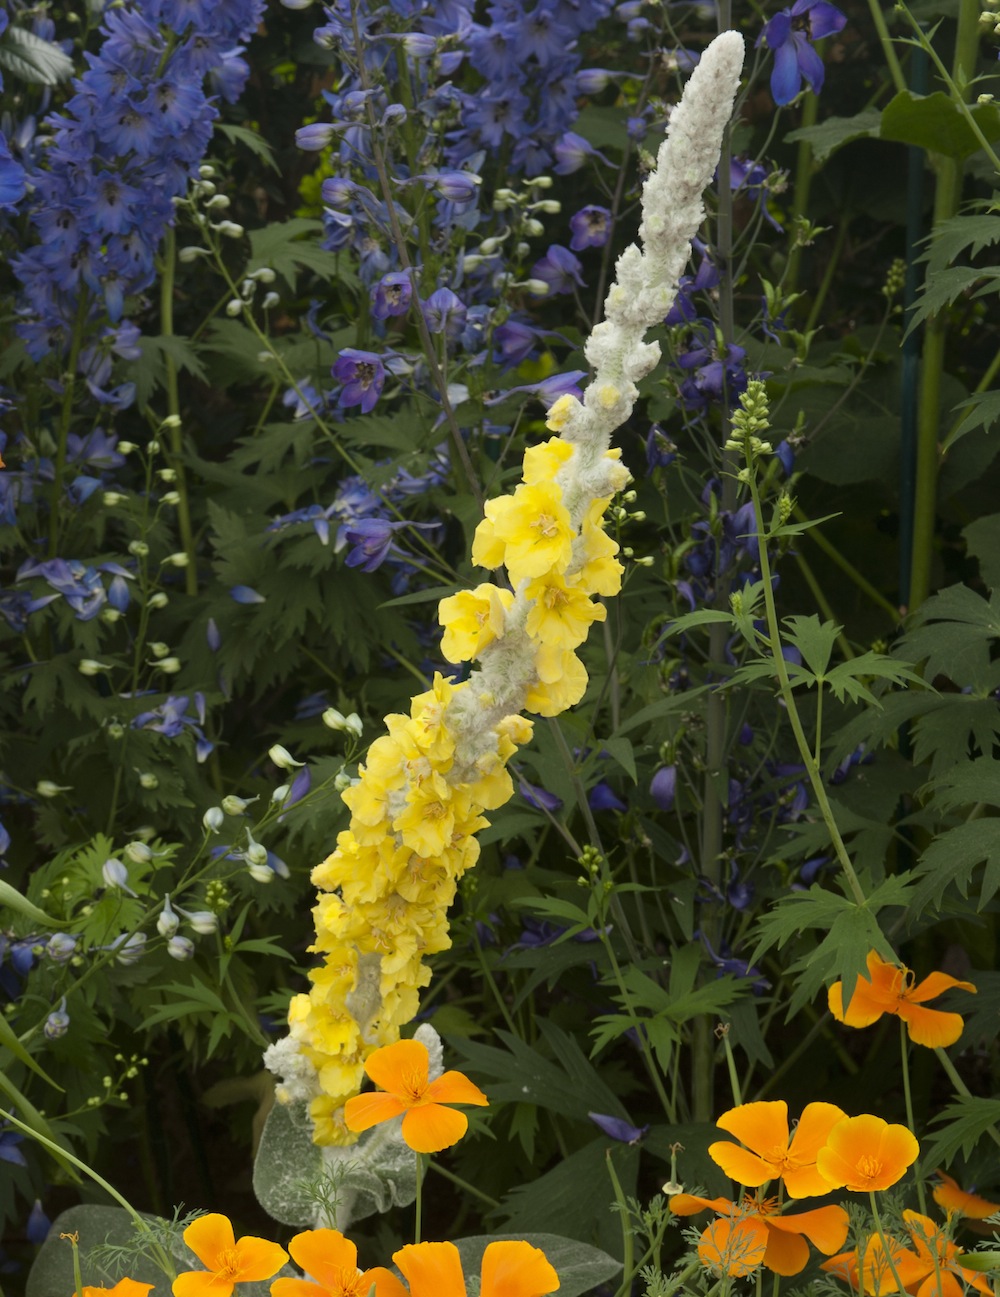 What's That Tall, Yellow Weed Doing in Monet's Garden? - Plant Talk